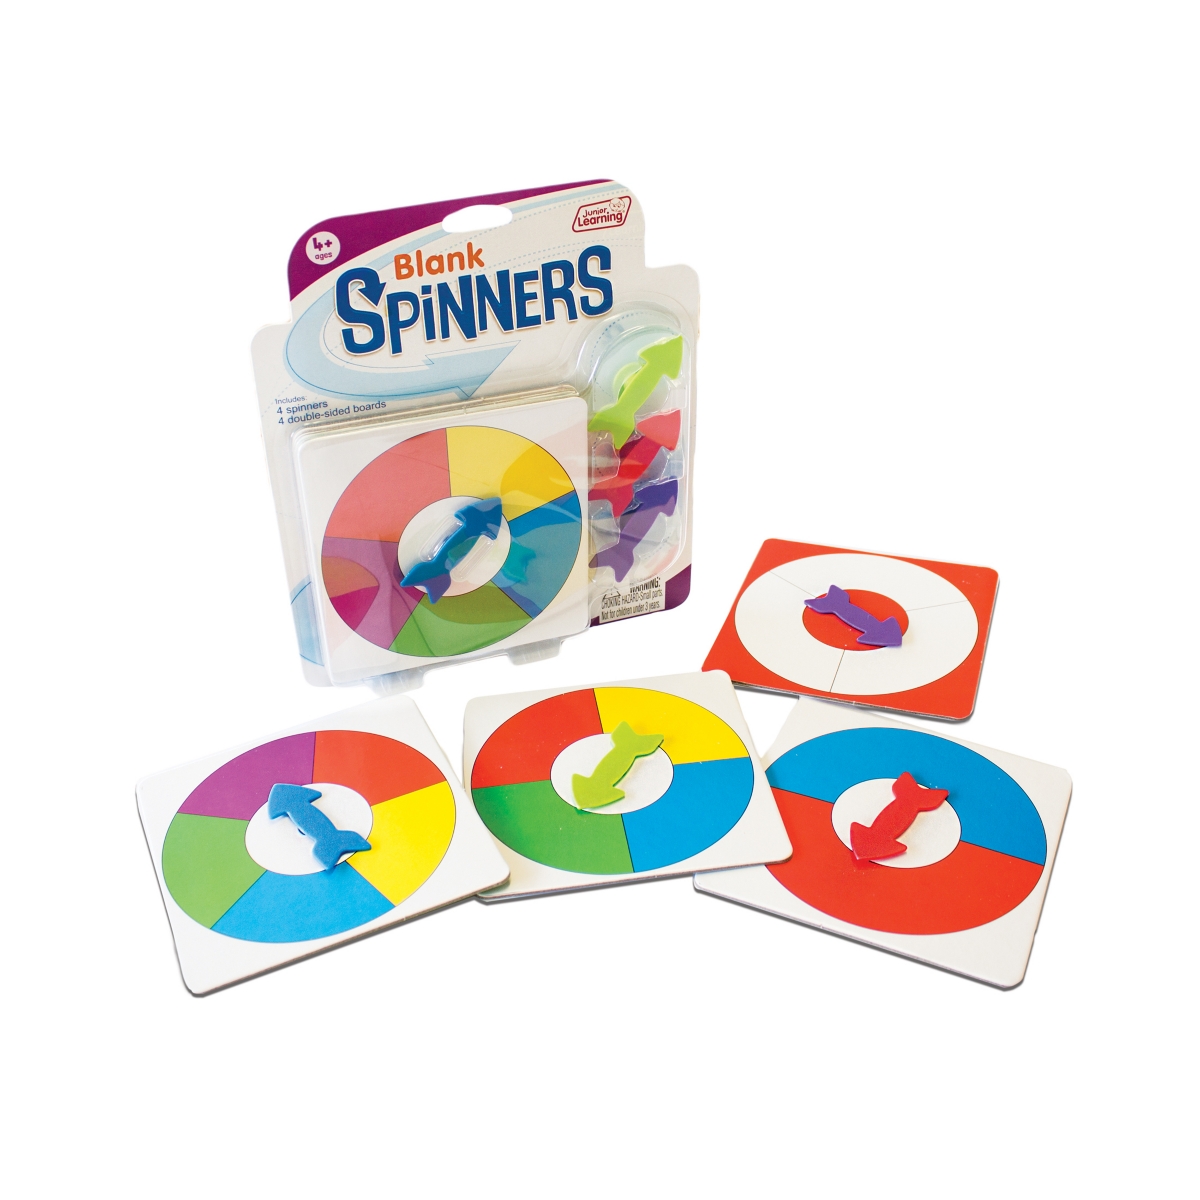 Junior Learning Blank Spinners Educational Learning Game In Multi